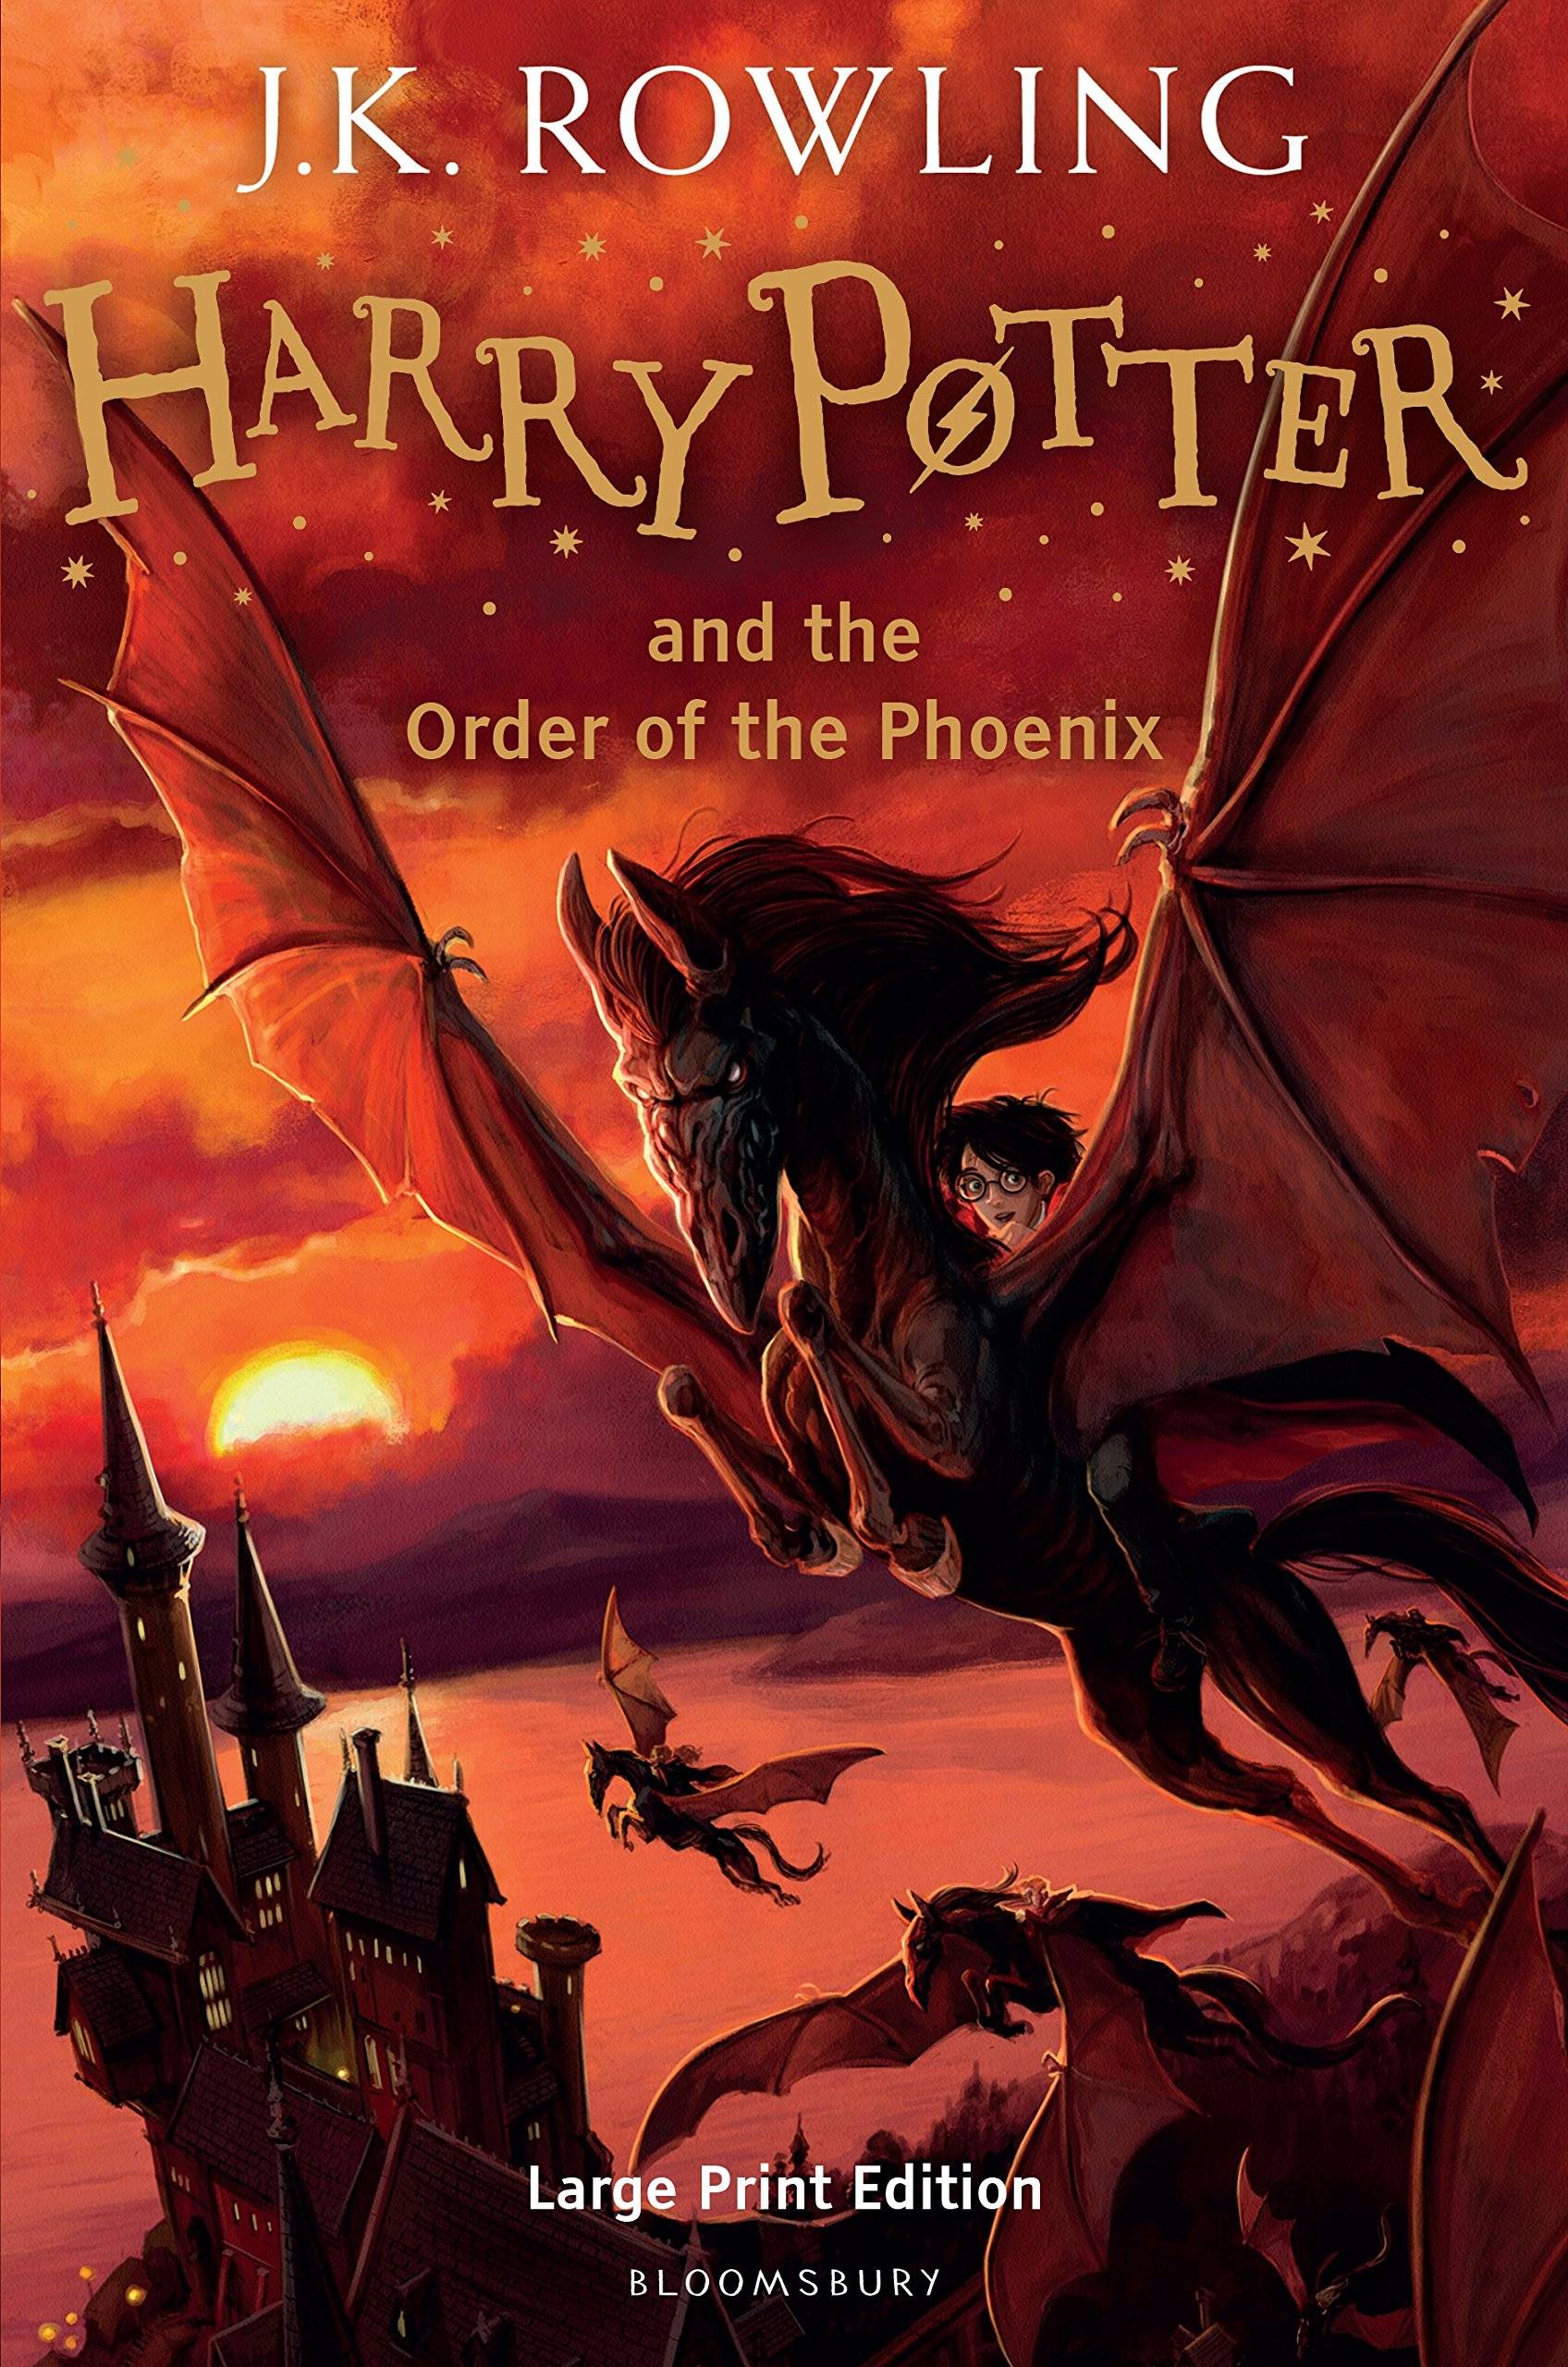 IMG : Harry Potter and the order of the Phoenix